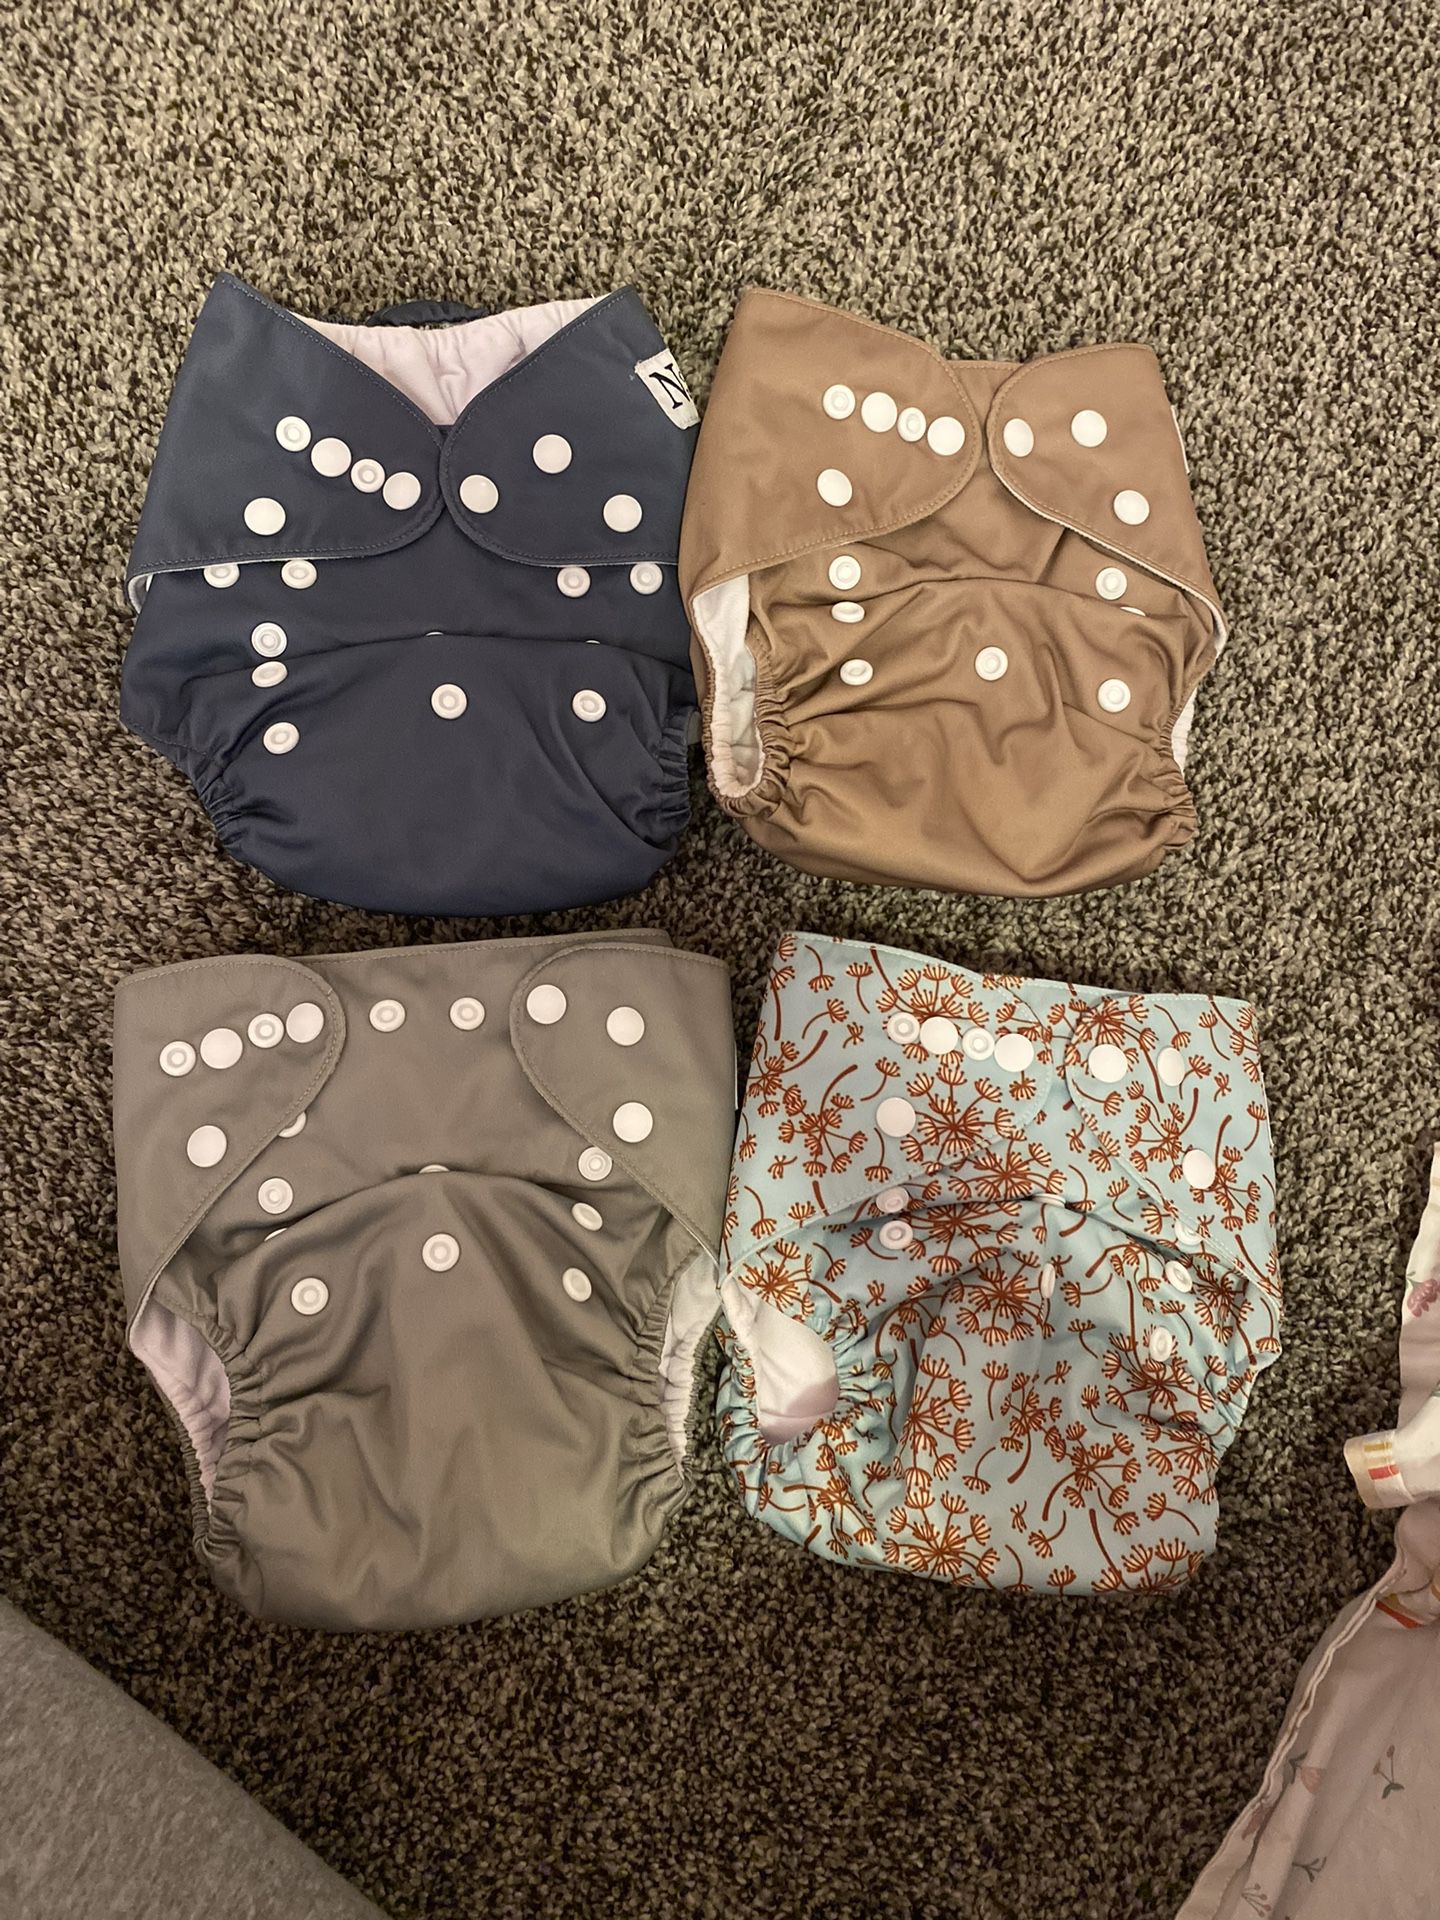 Nora’s Nursery Cloth Diapers with inserts 